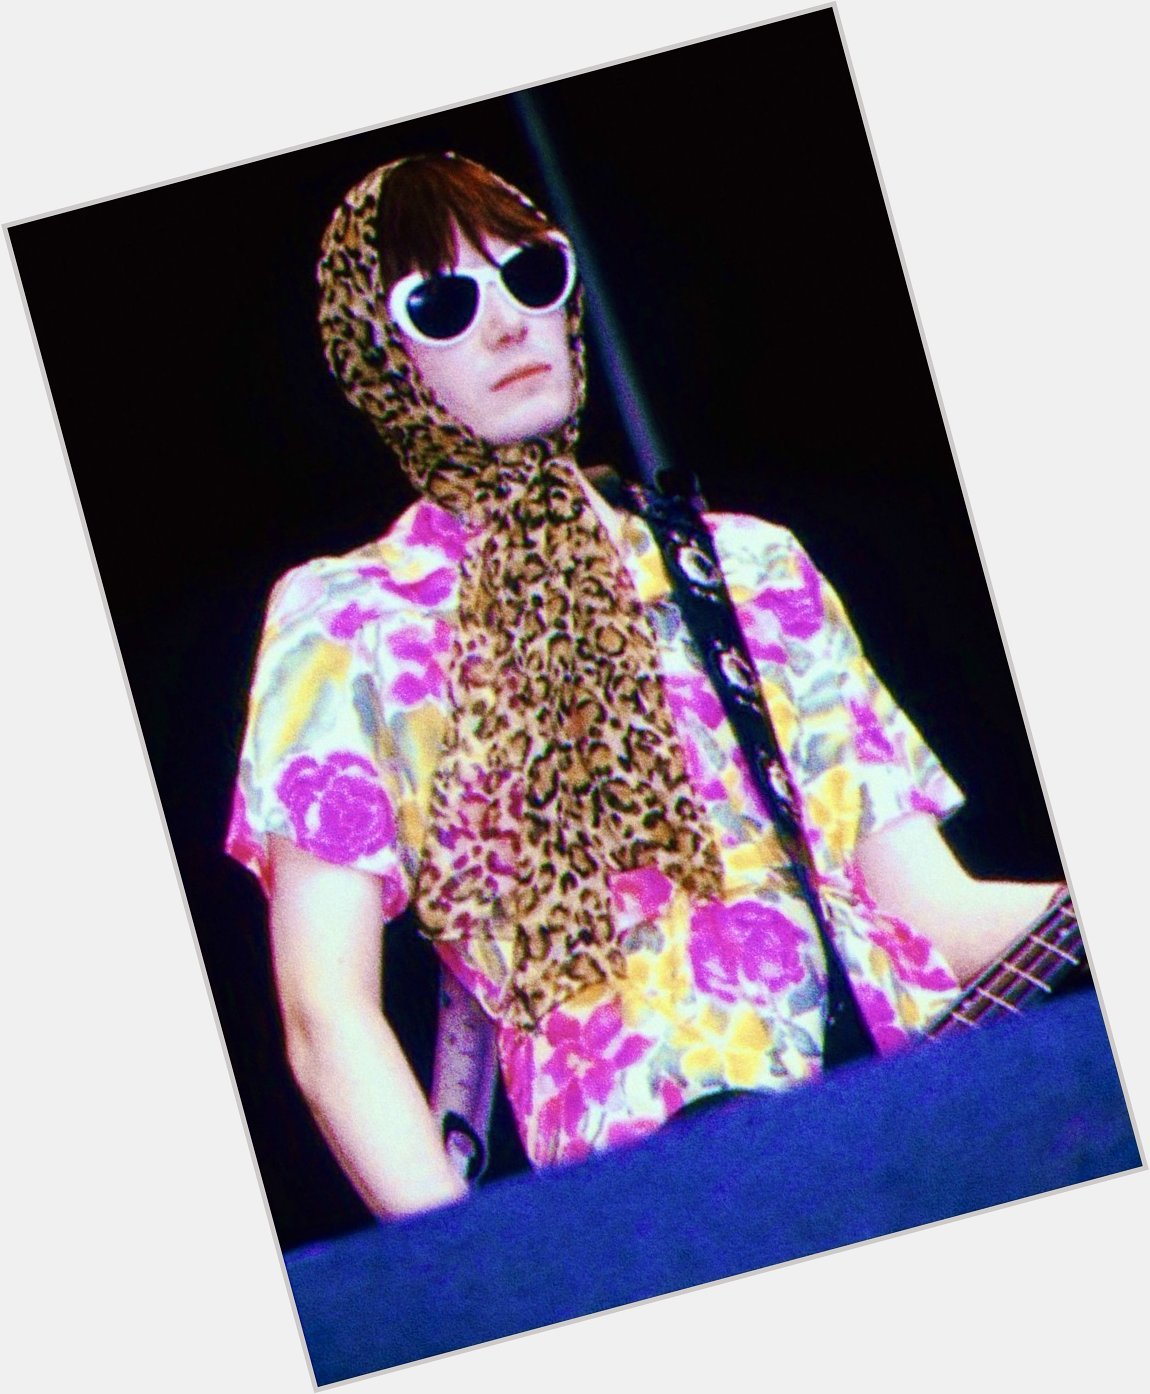 Sullen. Welsh. Tart
Happy Birthday Nicky Wire! 
Make 2023 the year of the solo record. 